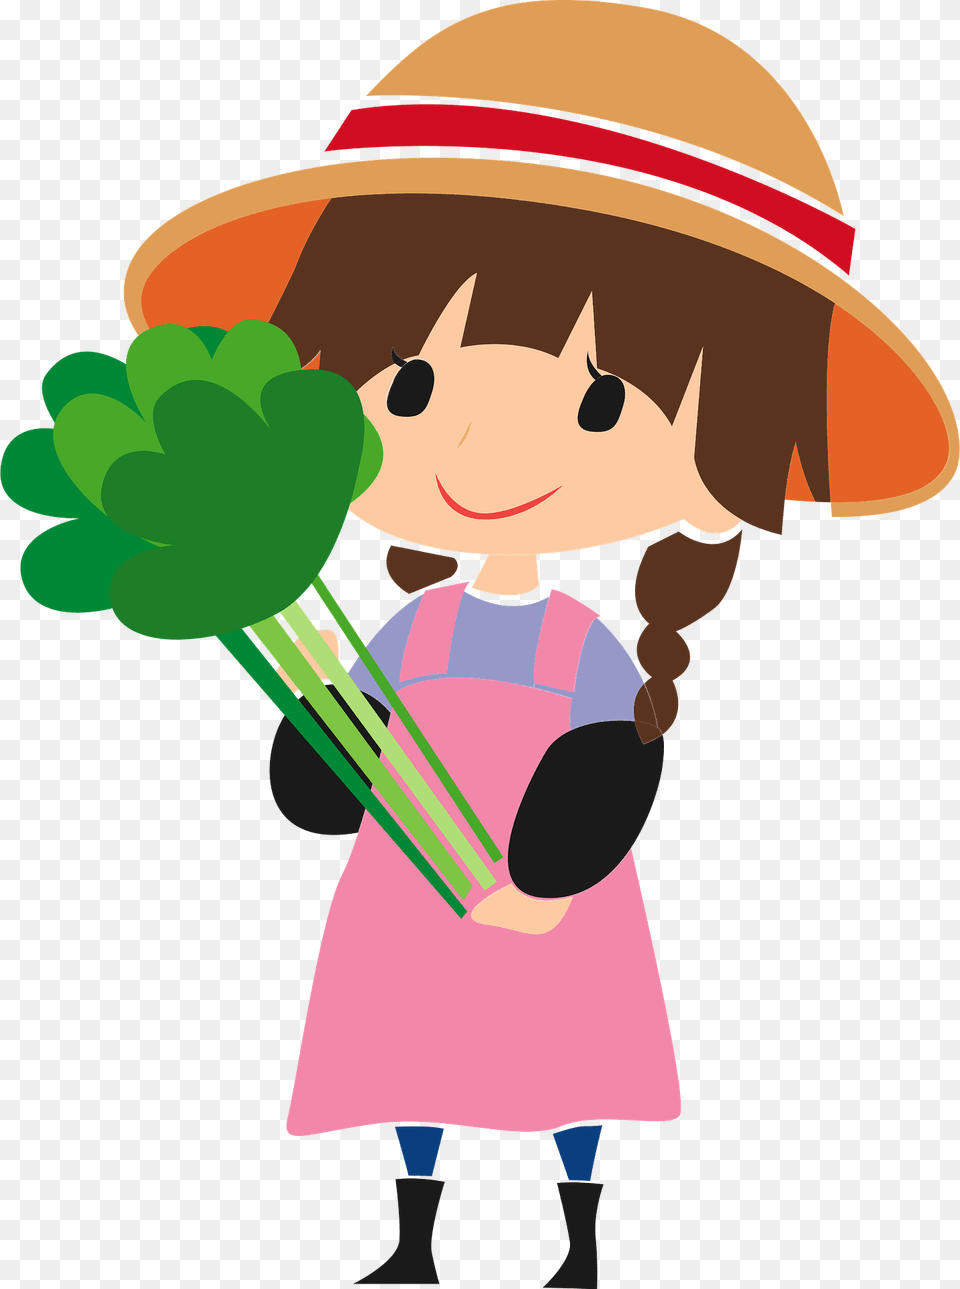 Farmer Agriculture Clipart, Clothing, Coat, Art, Graphics Png